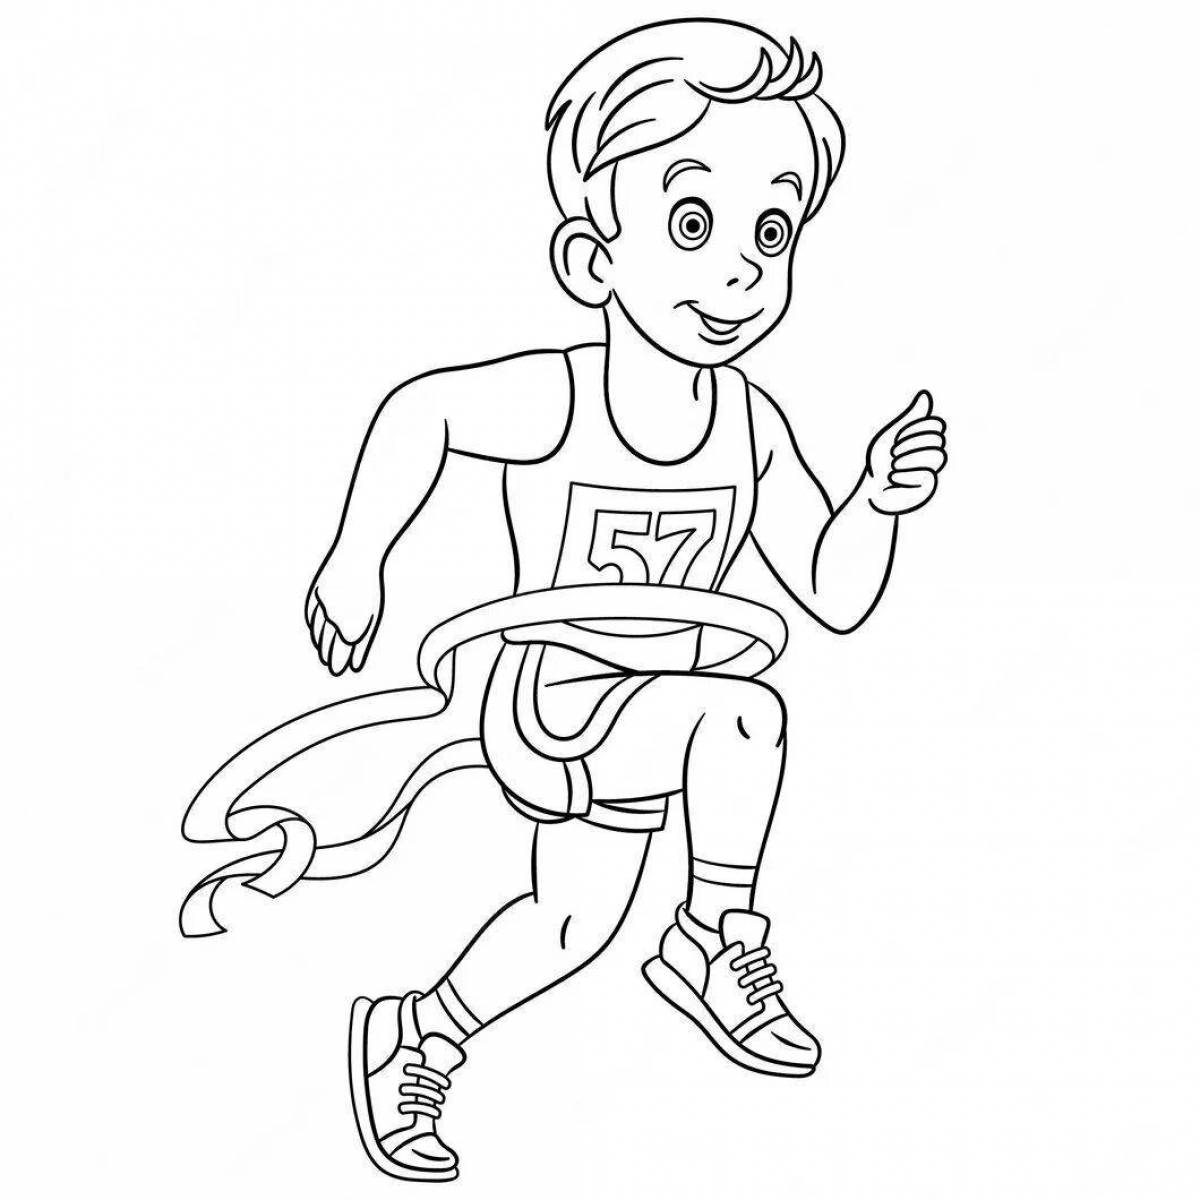 Animated running coloring page